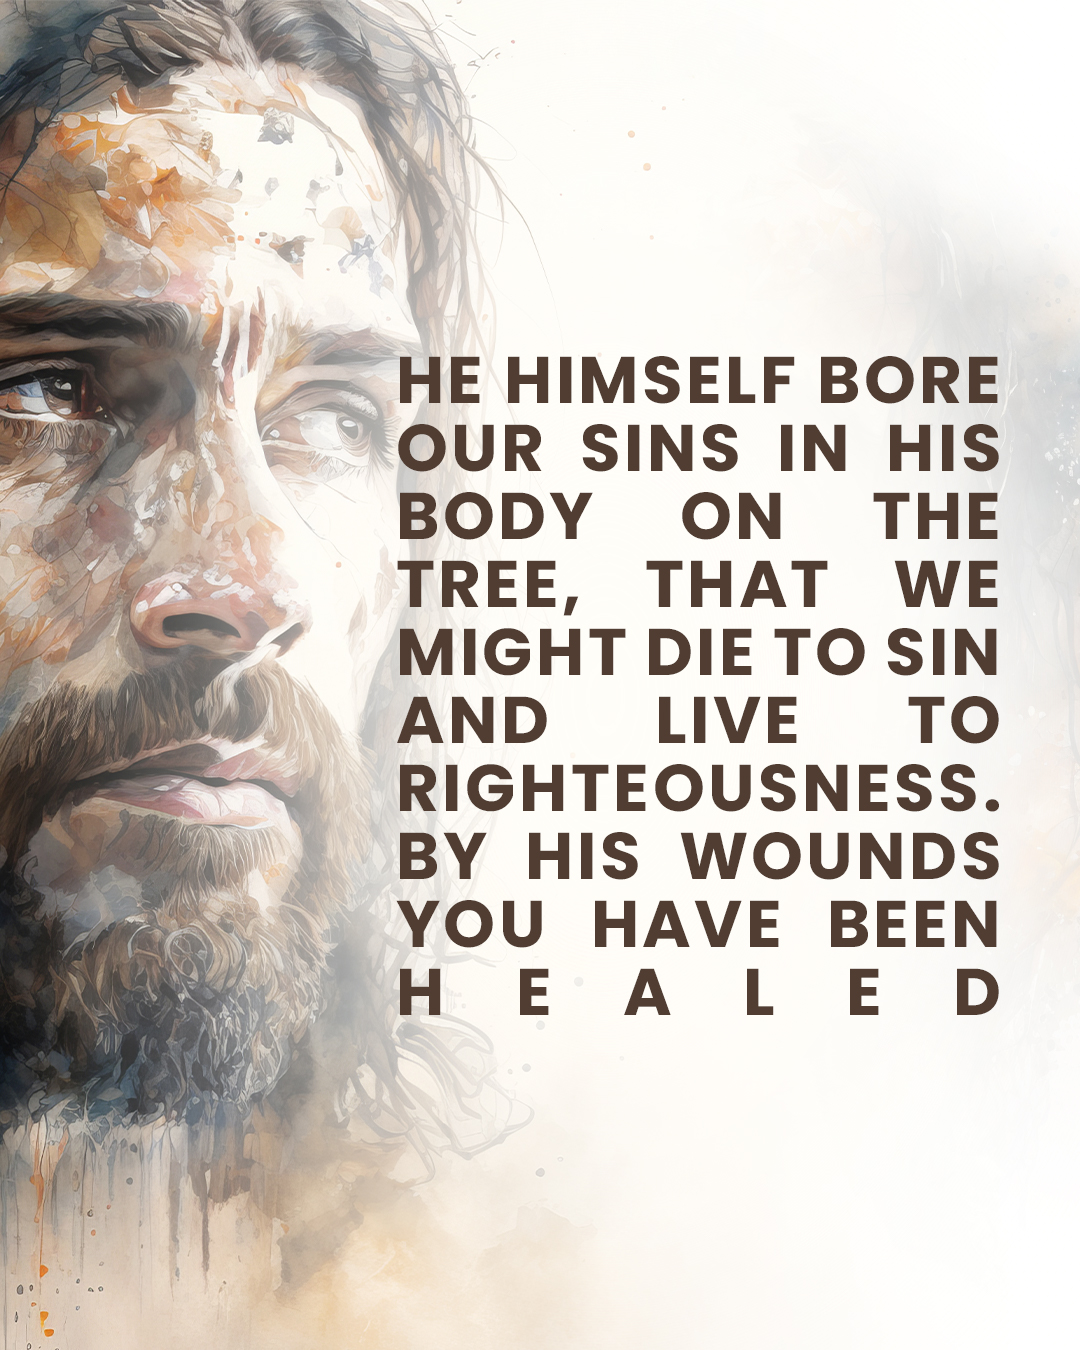 By his wounds you have been healed.